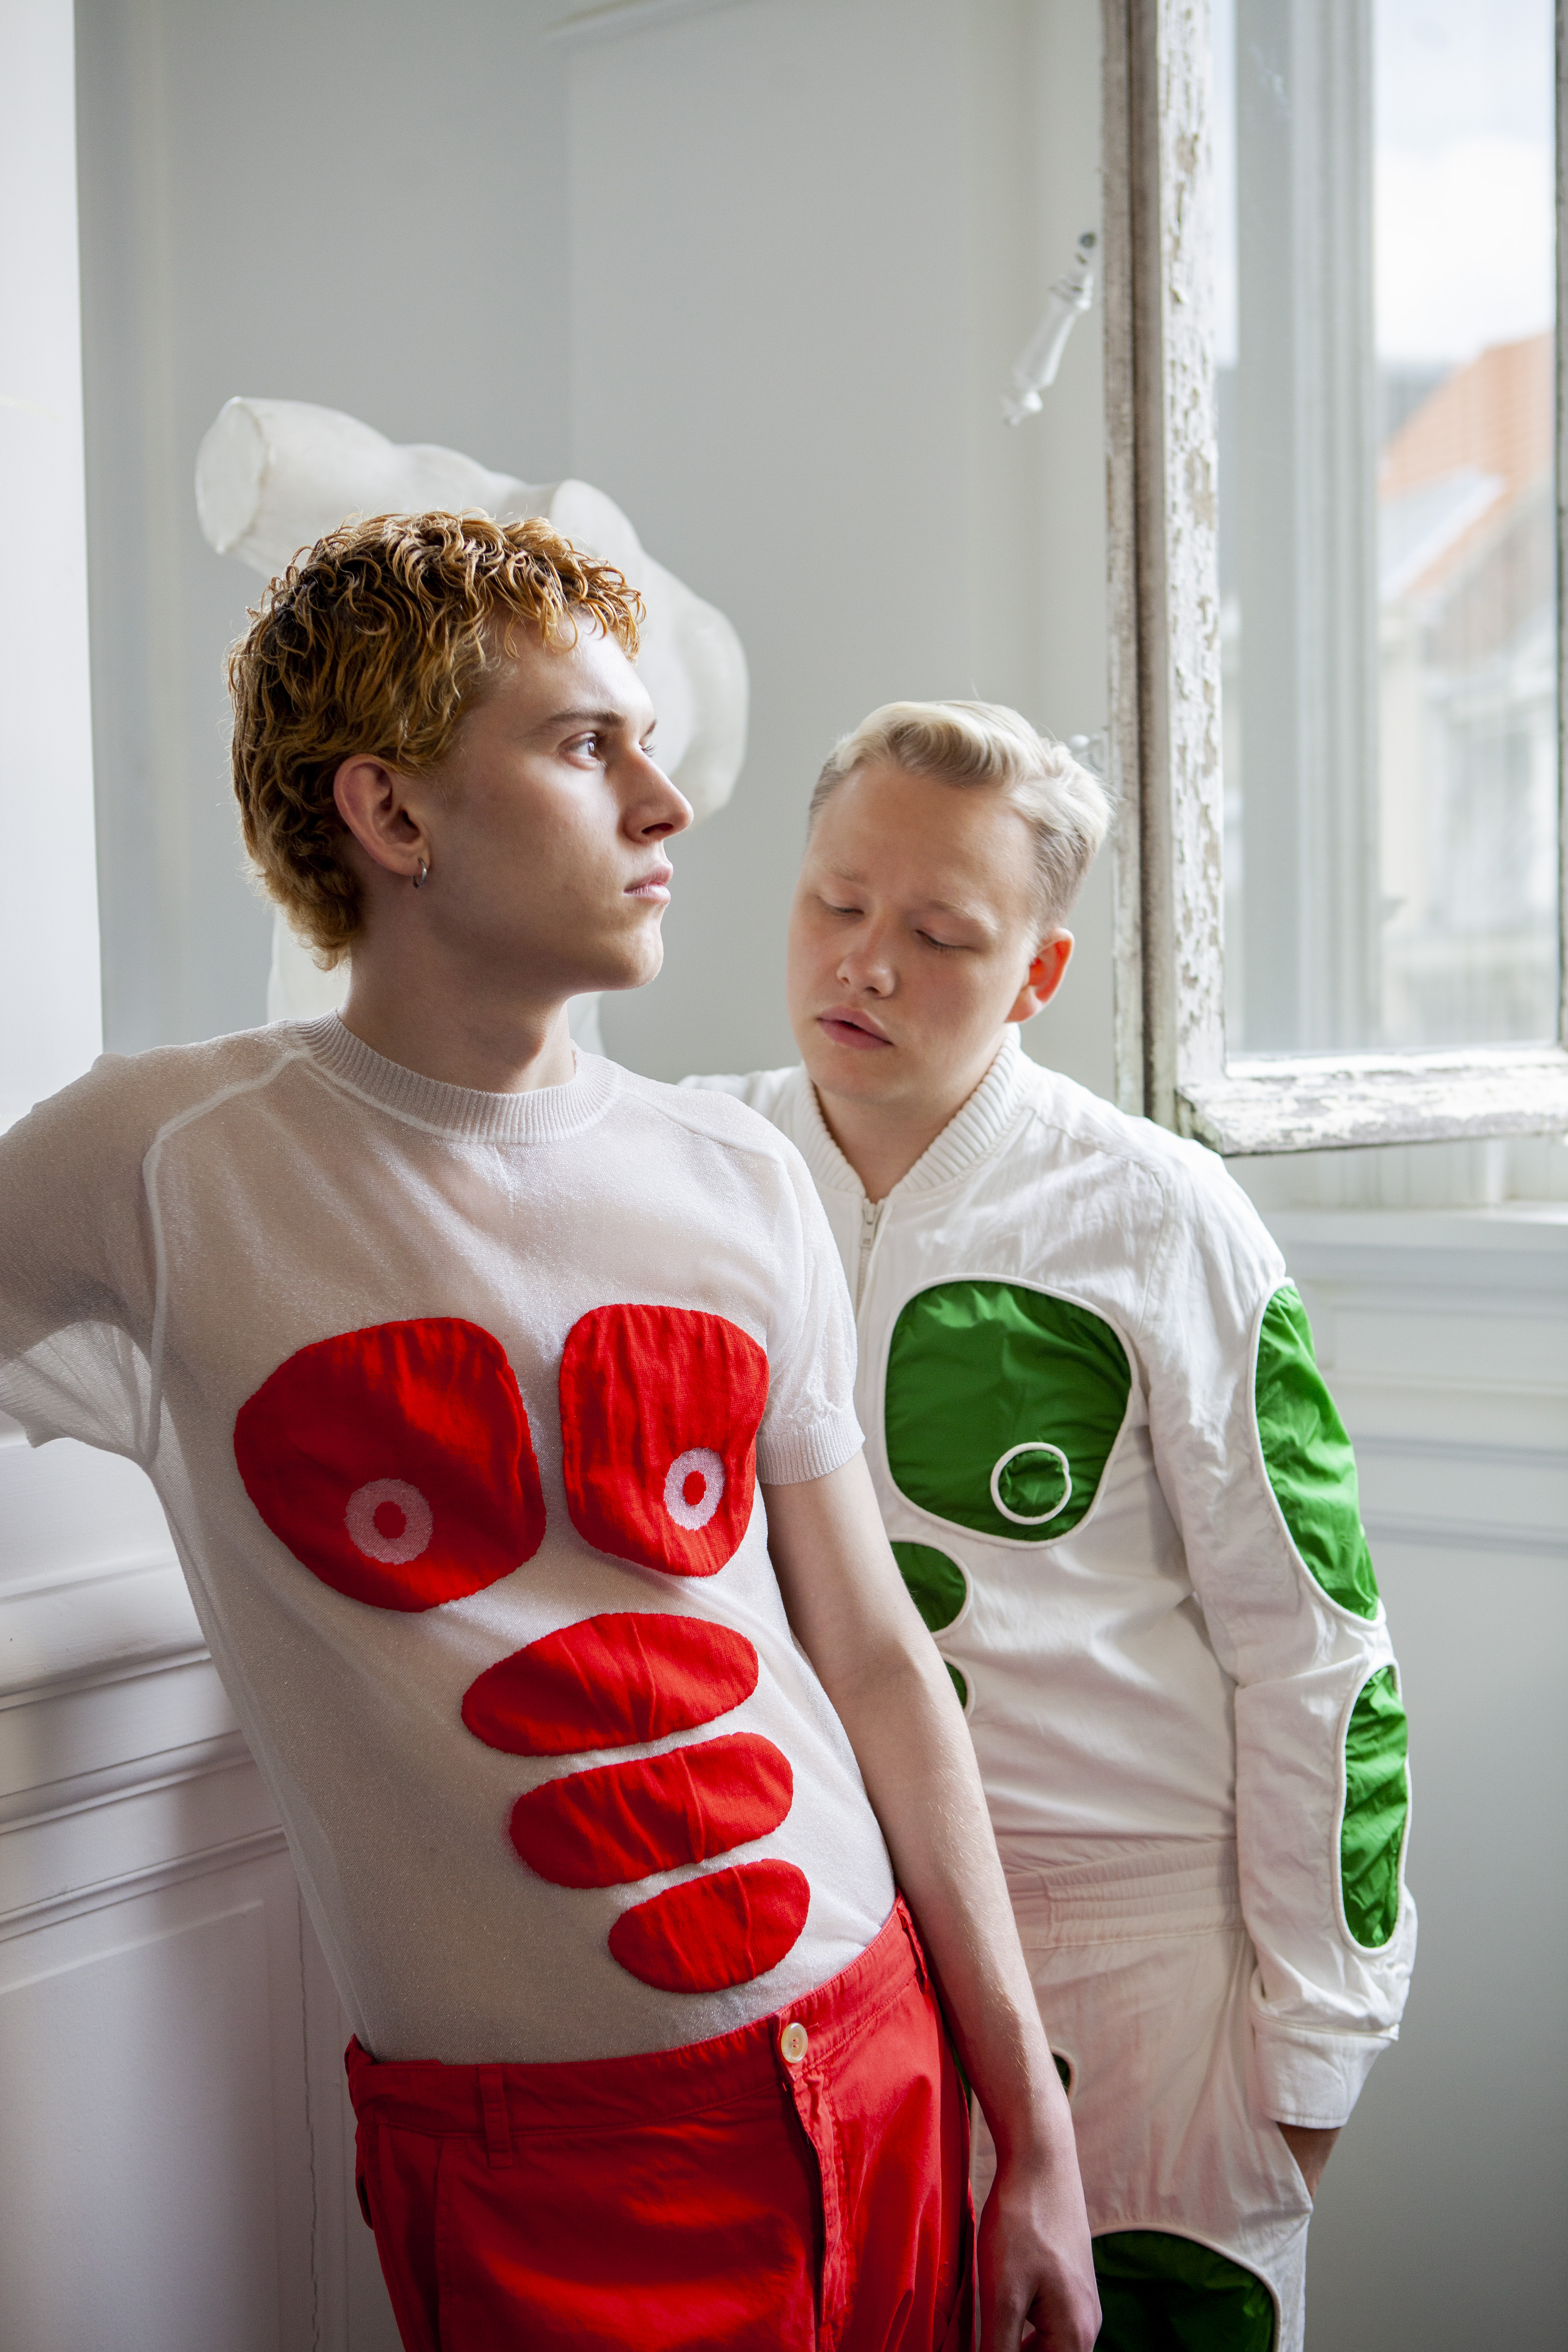 Walter Van Beirendonck on His Radical Label: “I Really Go to the Flesh”